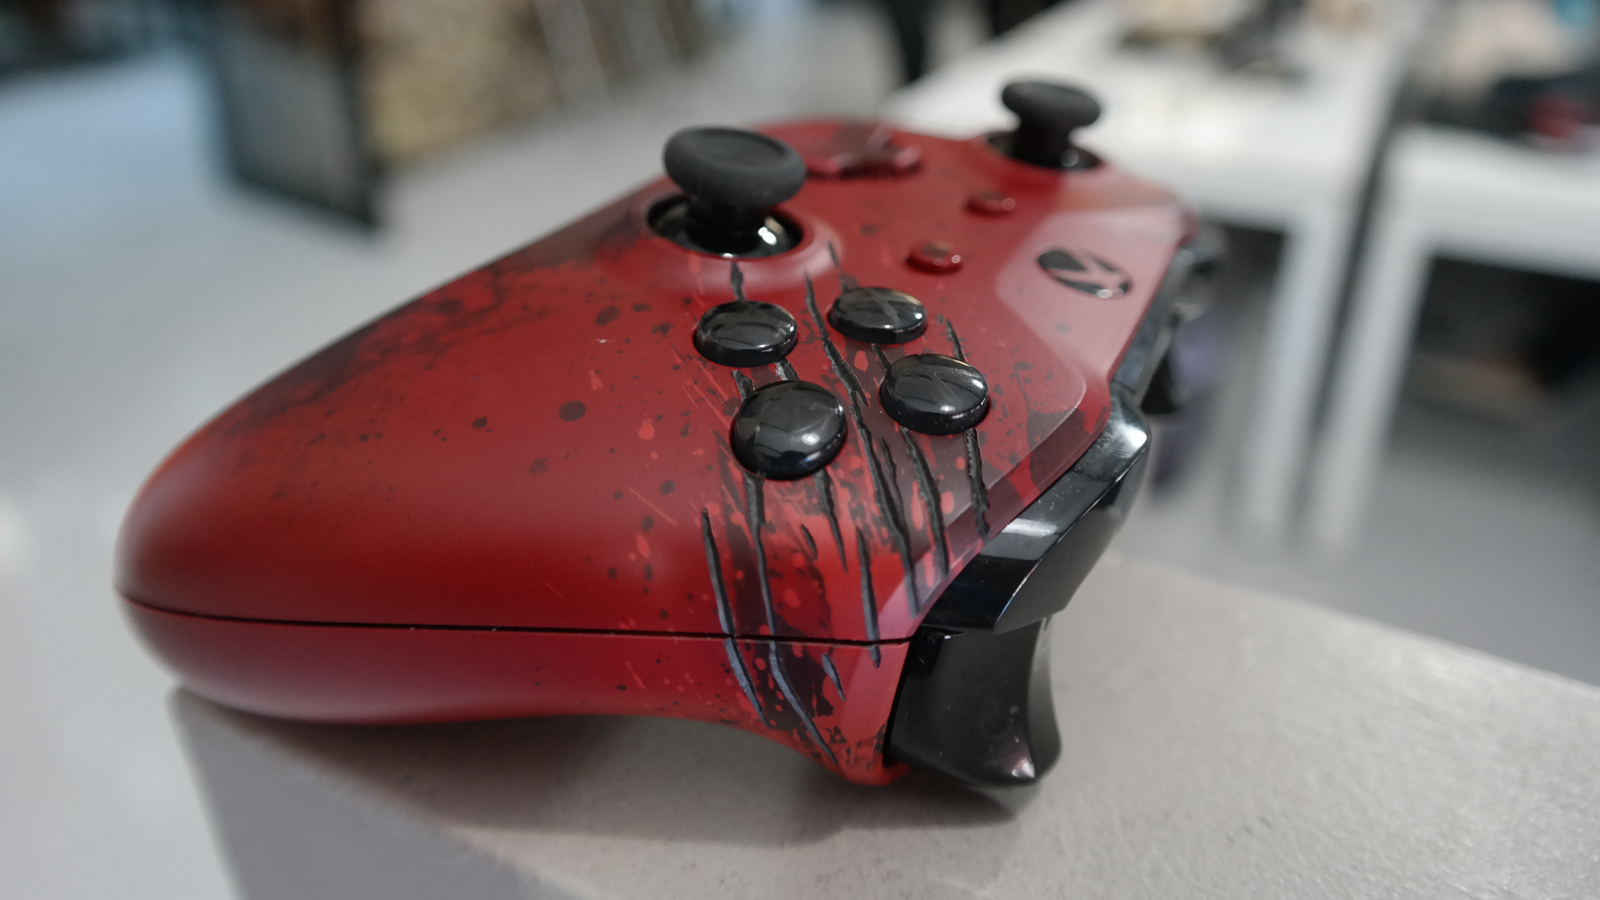 xbox-one-crimson-limited-edition-controller-review-002